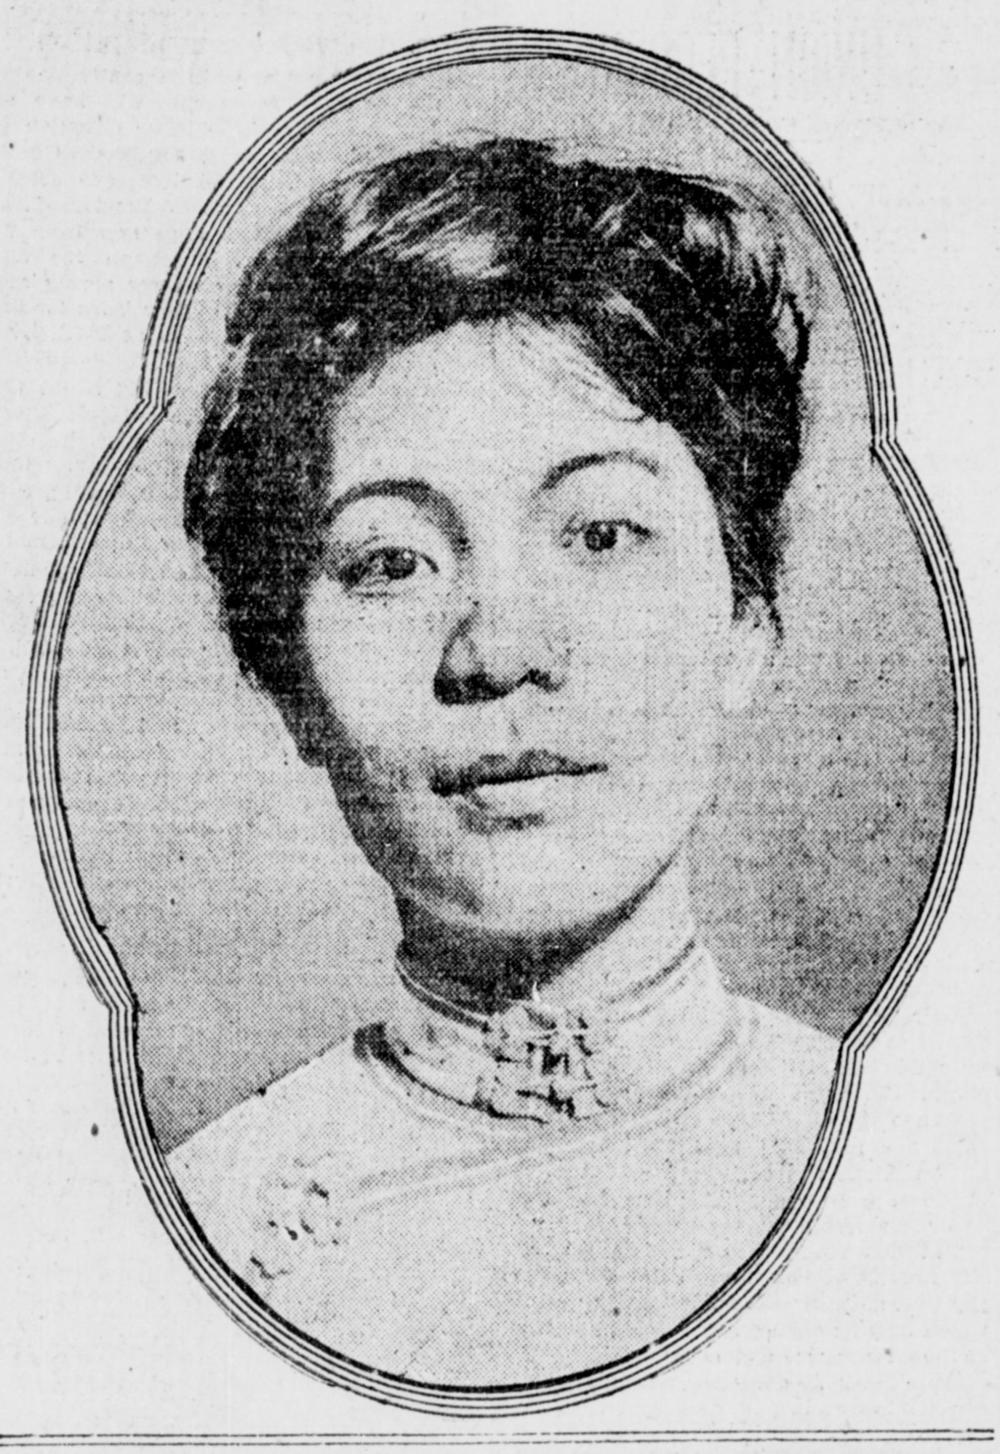 Mabel Ping-Hua Lee became a powerful voice in the suffrage movement starting as a teenager.